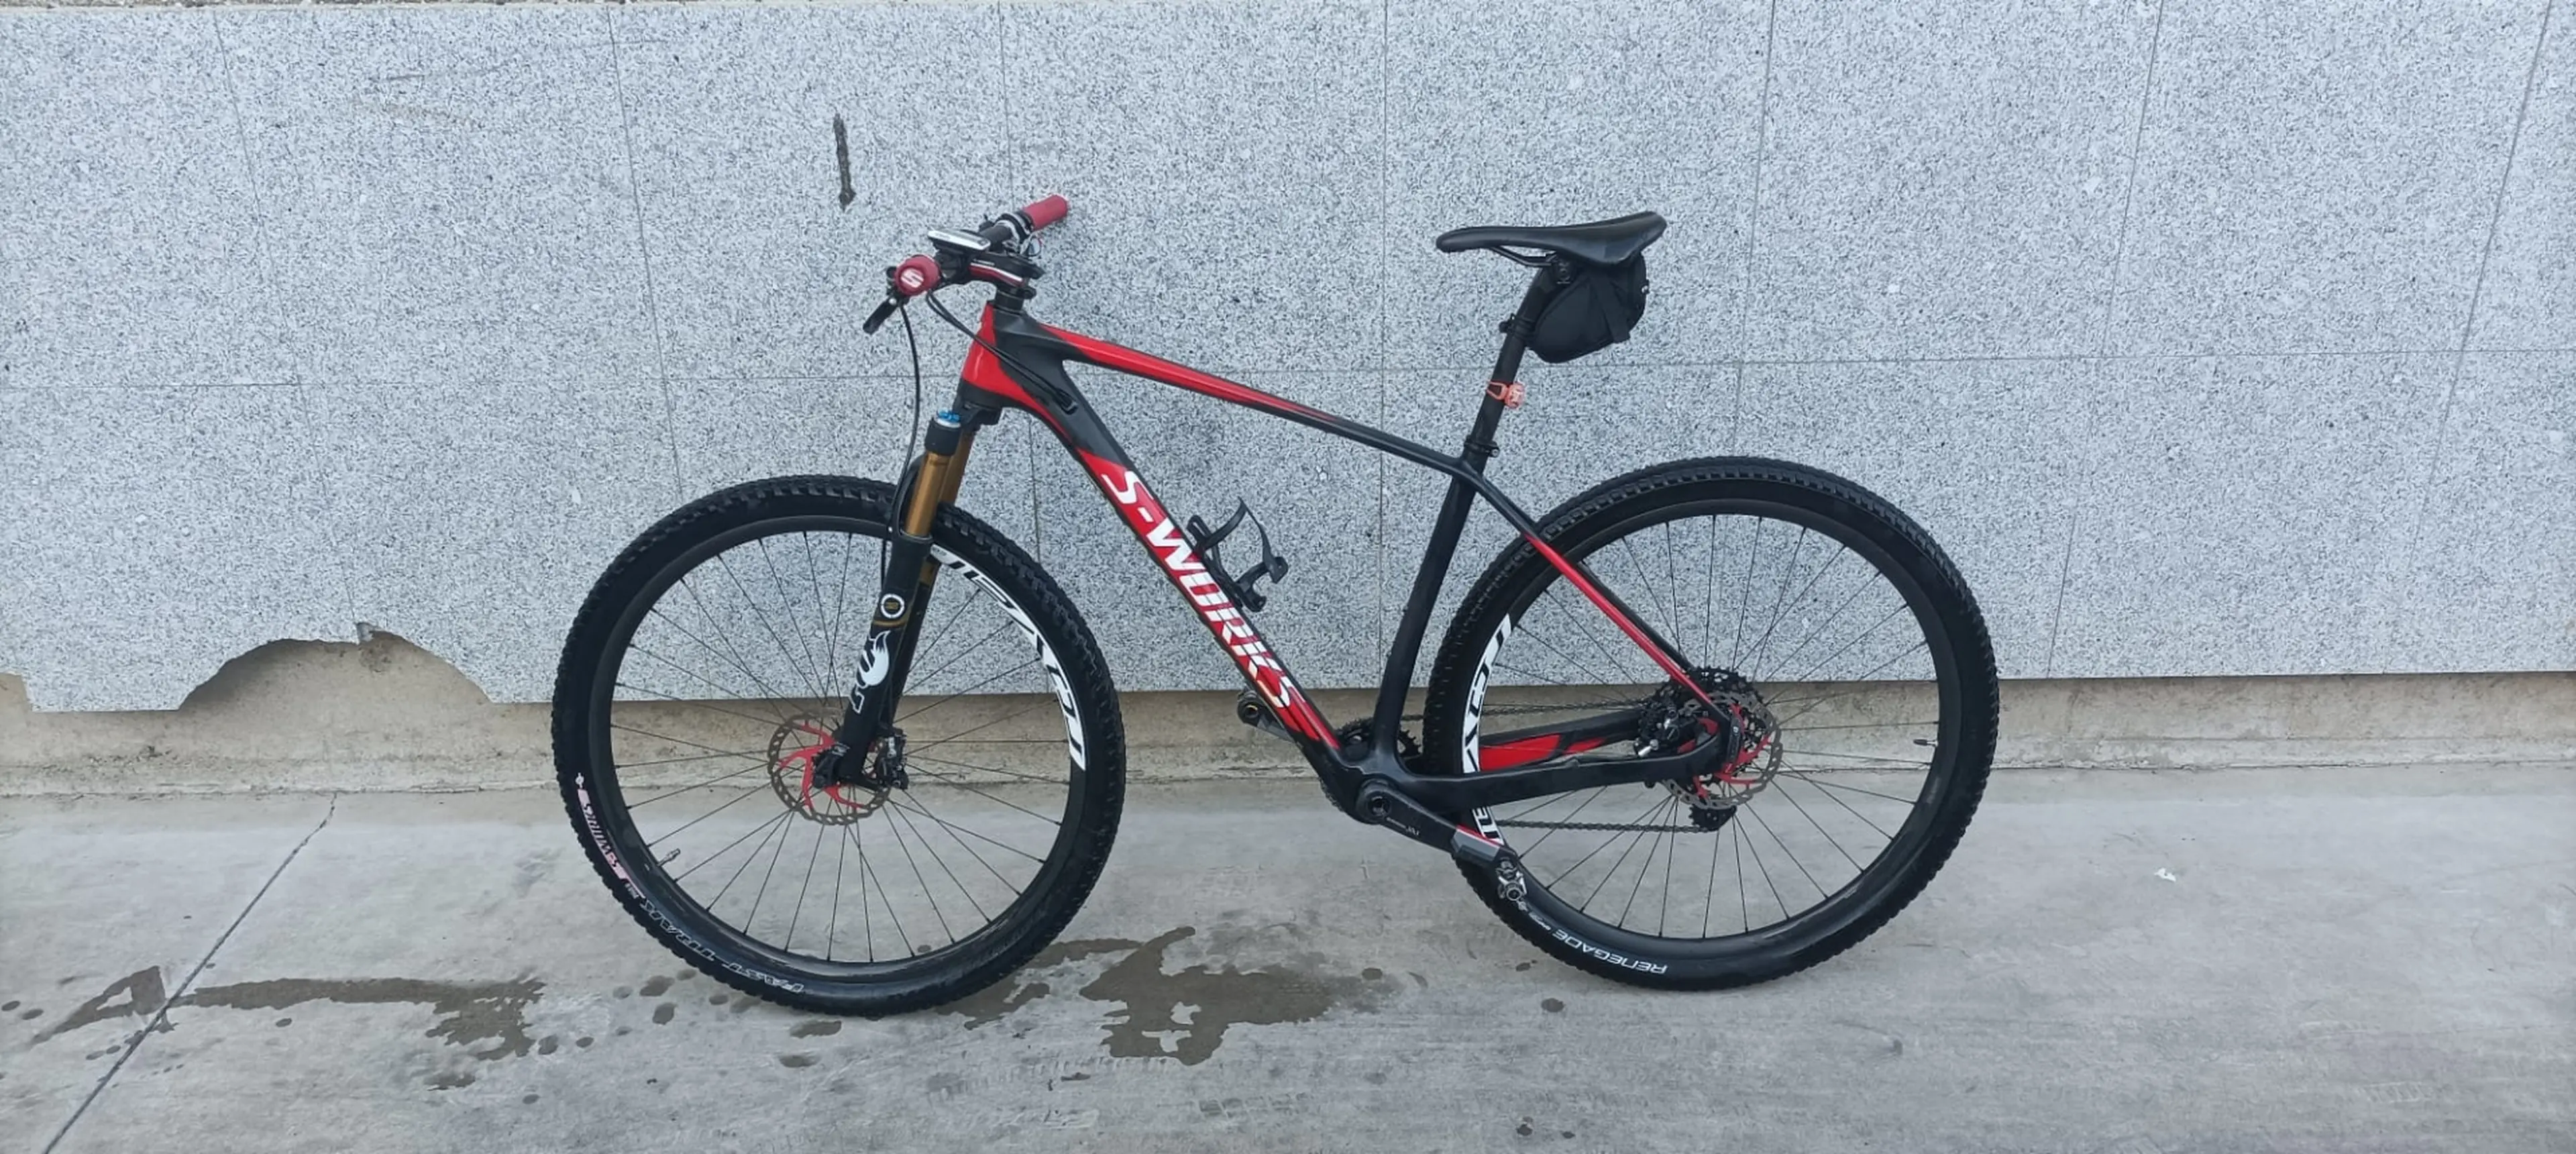 6. Specialized stumpjumper S-Works